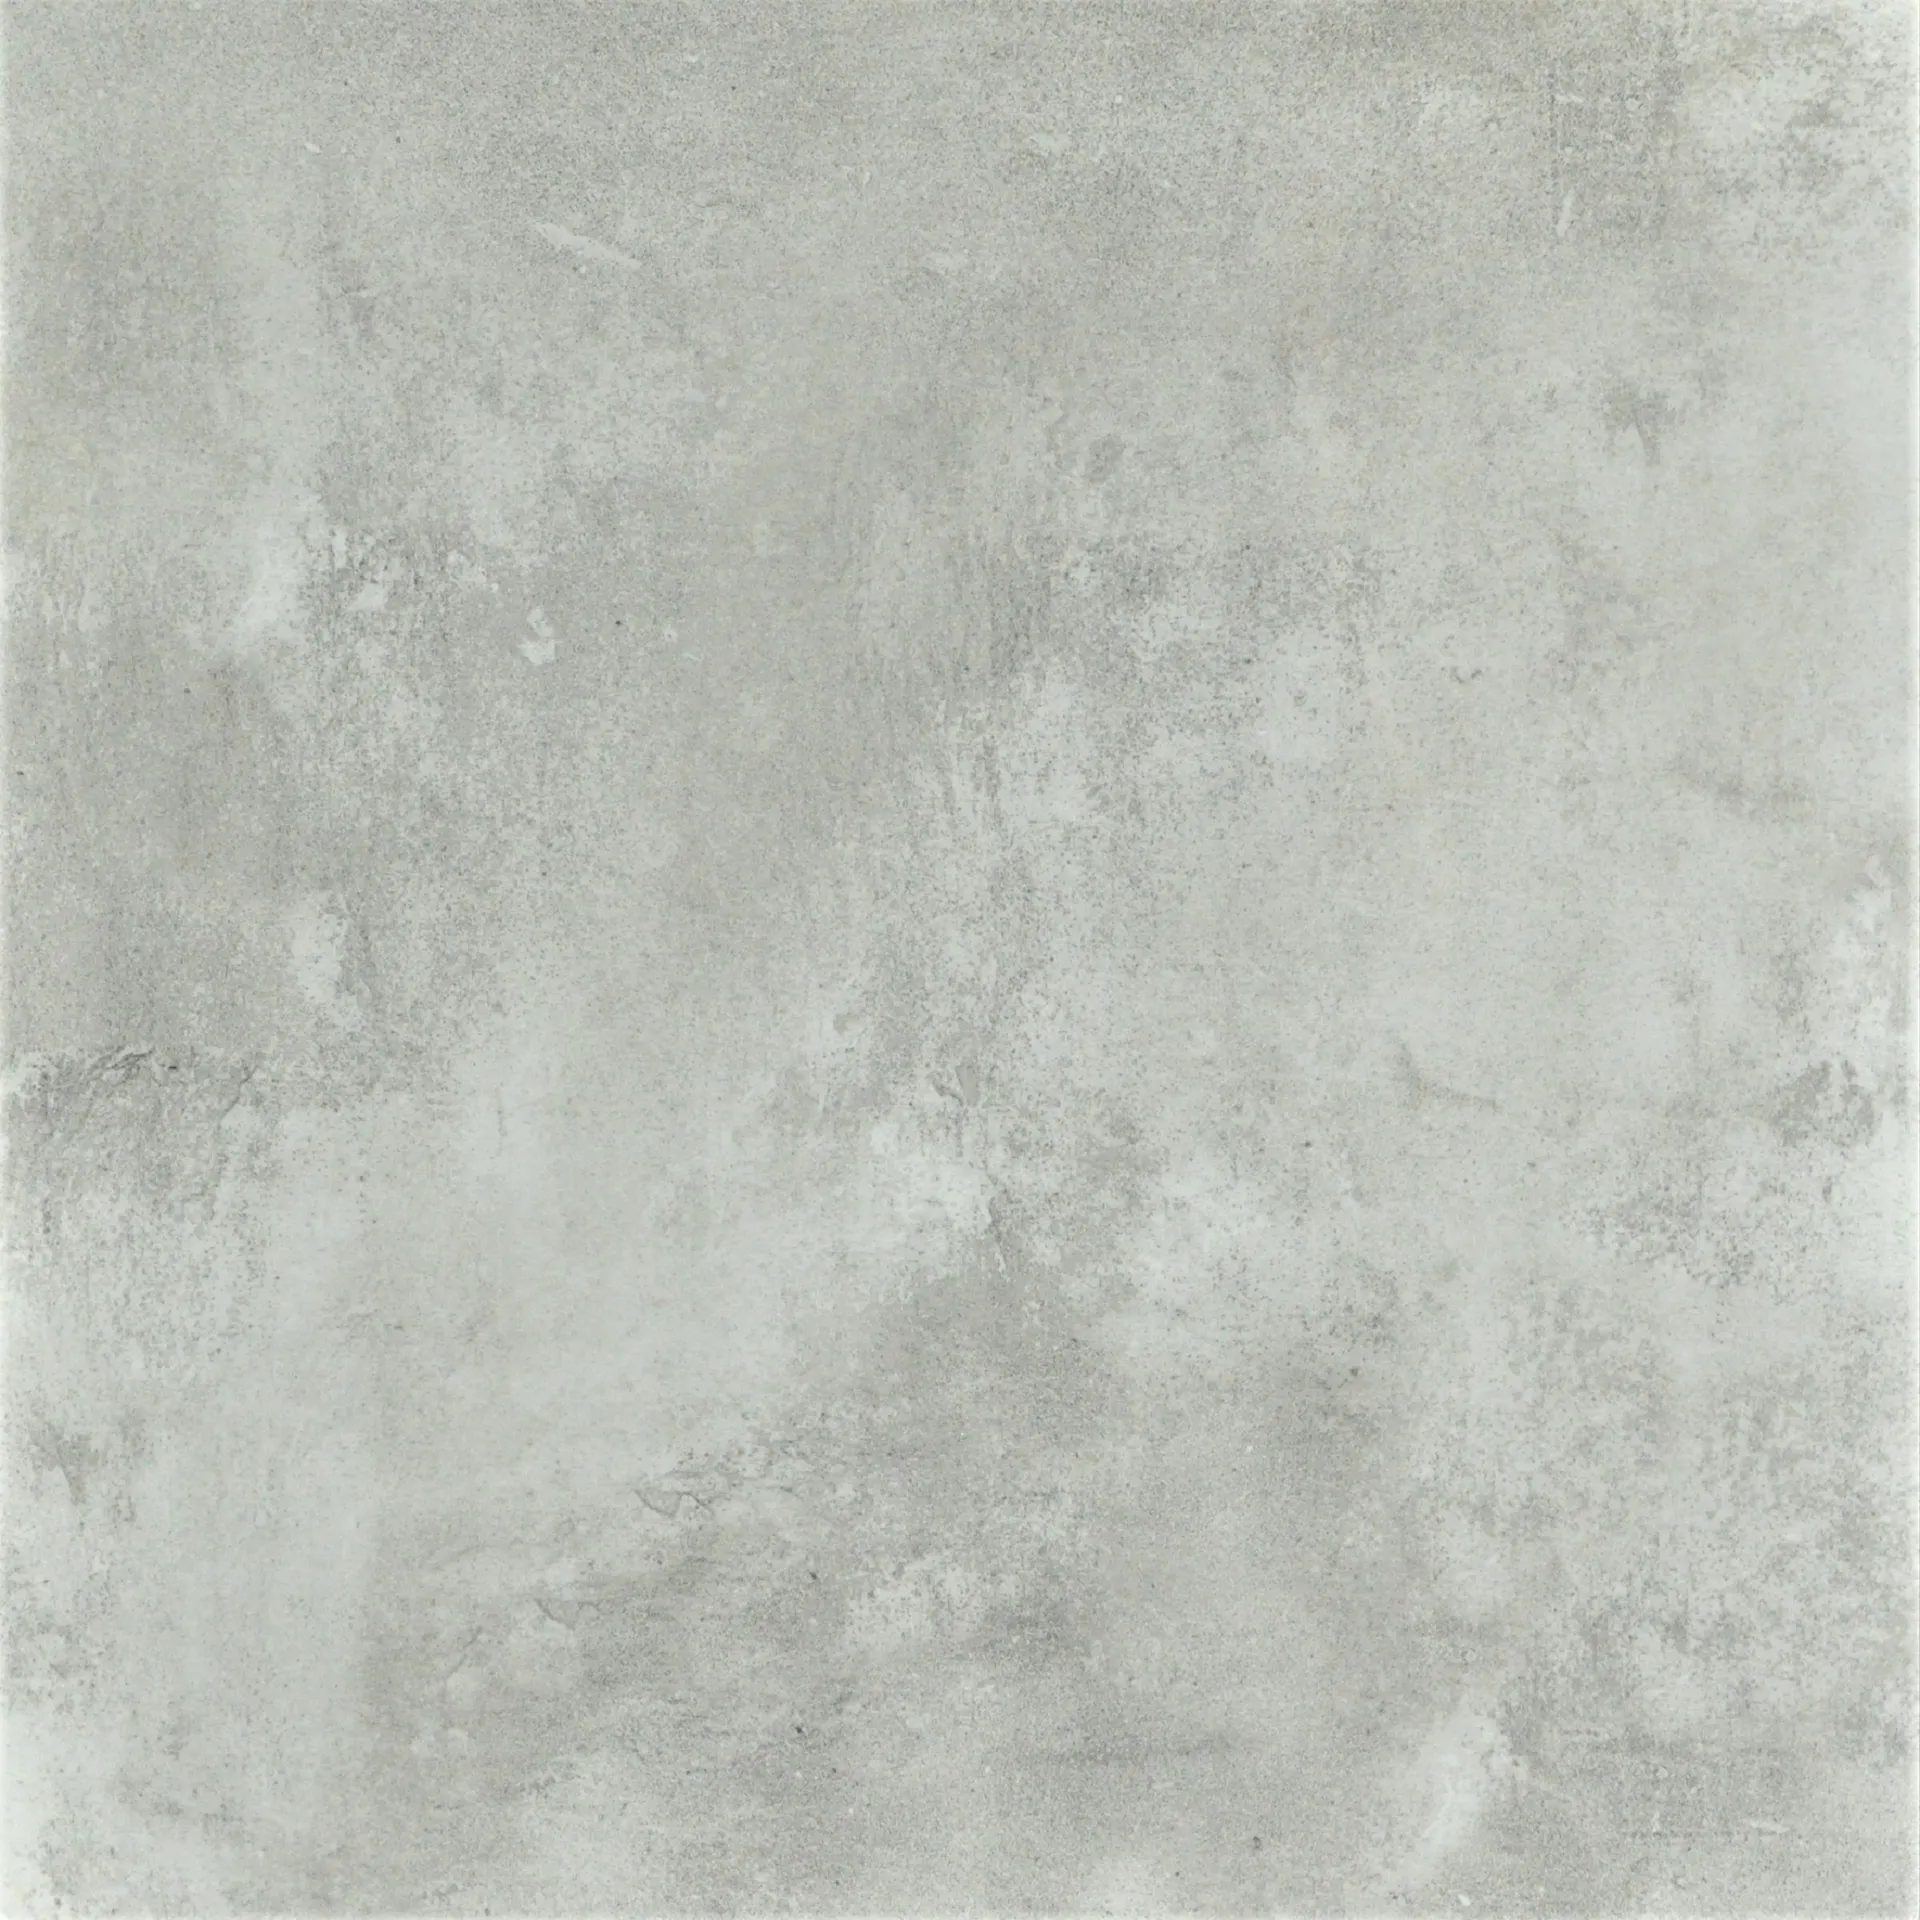 GRES MONTREAL GRIS GLOSSY RECT 60X60 EUROCERAMIC